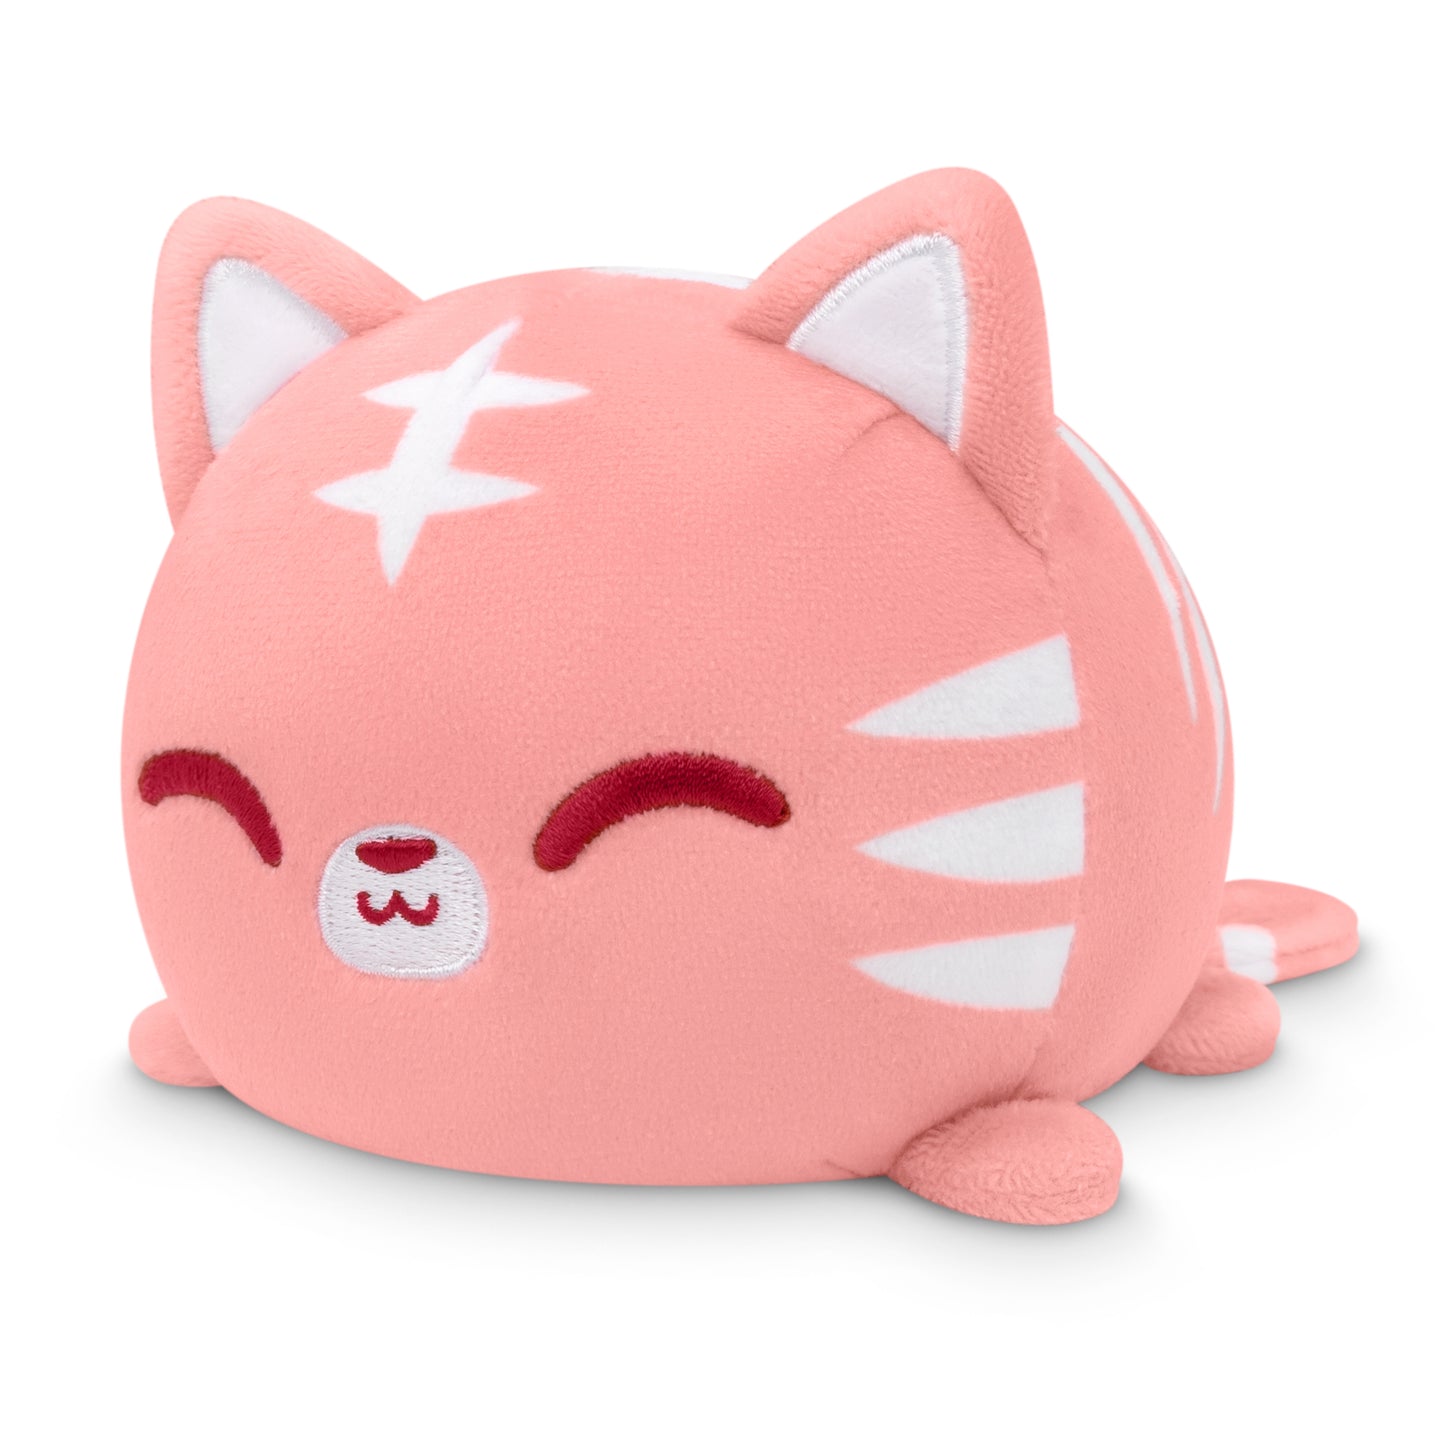 An adorable Plushiverse Love Letter Tiger plushie tote bag from TeeTurtle in pink and white is peacefully resting on a white surface.